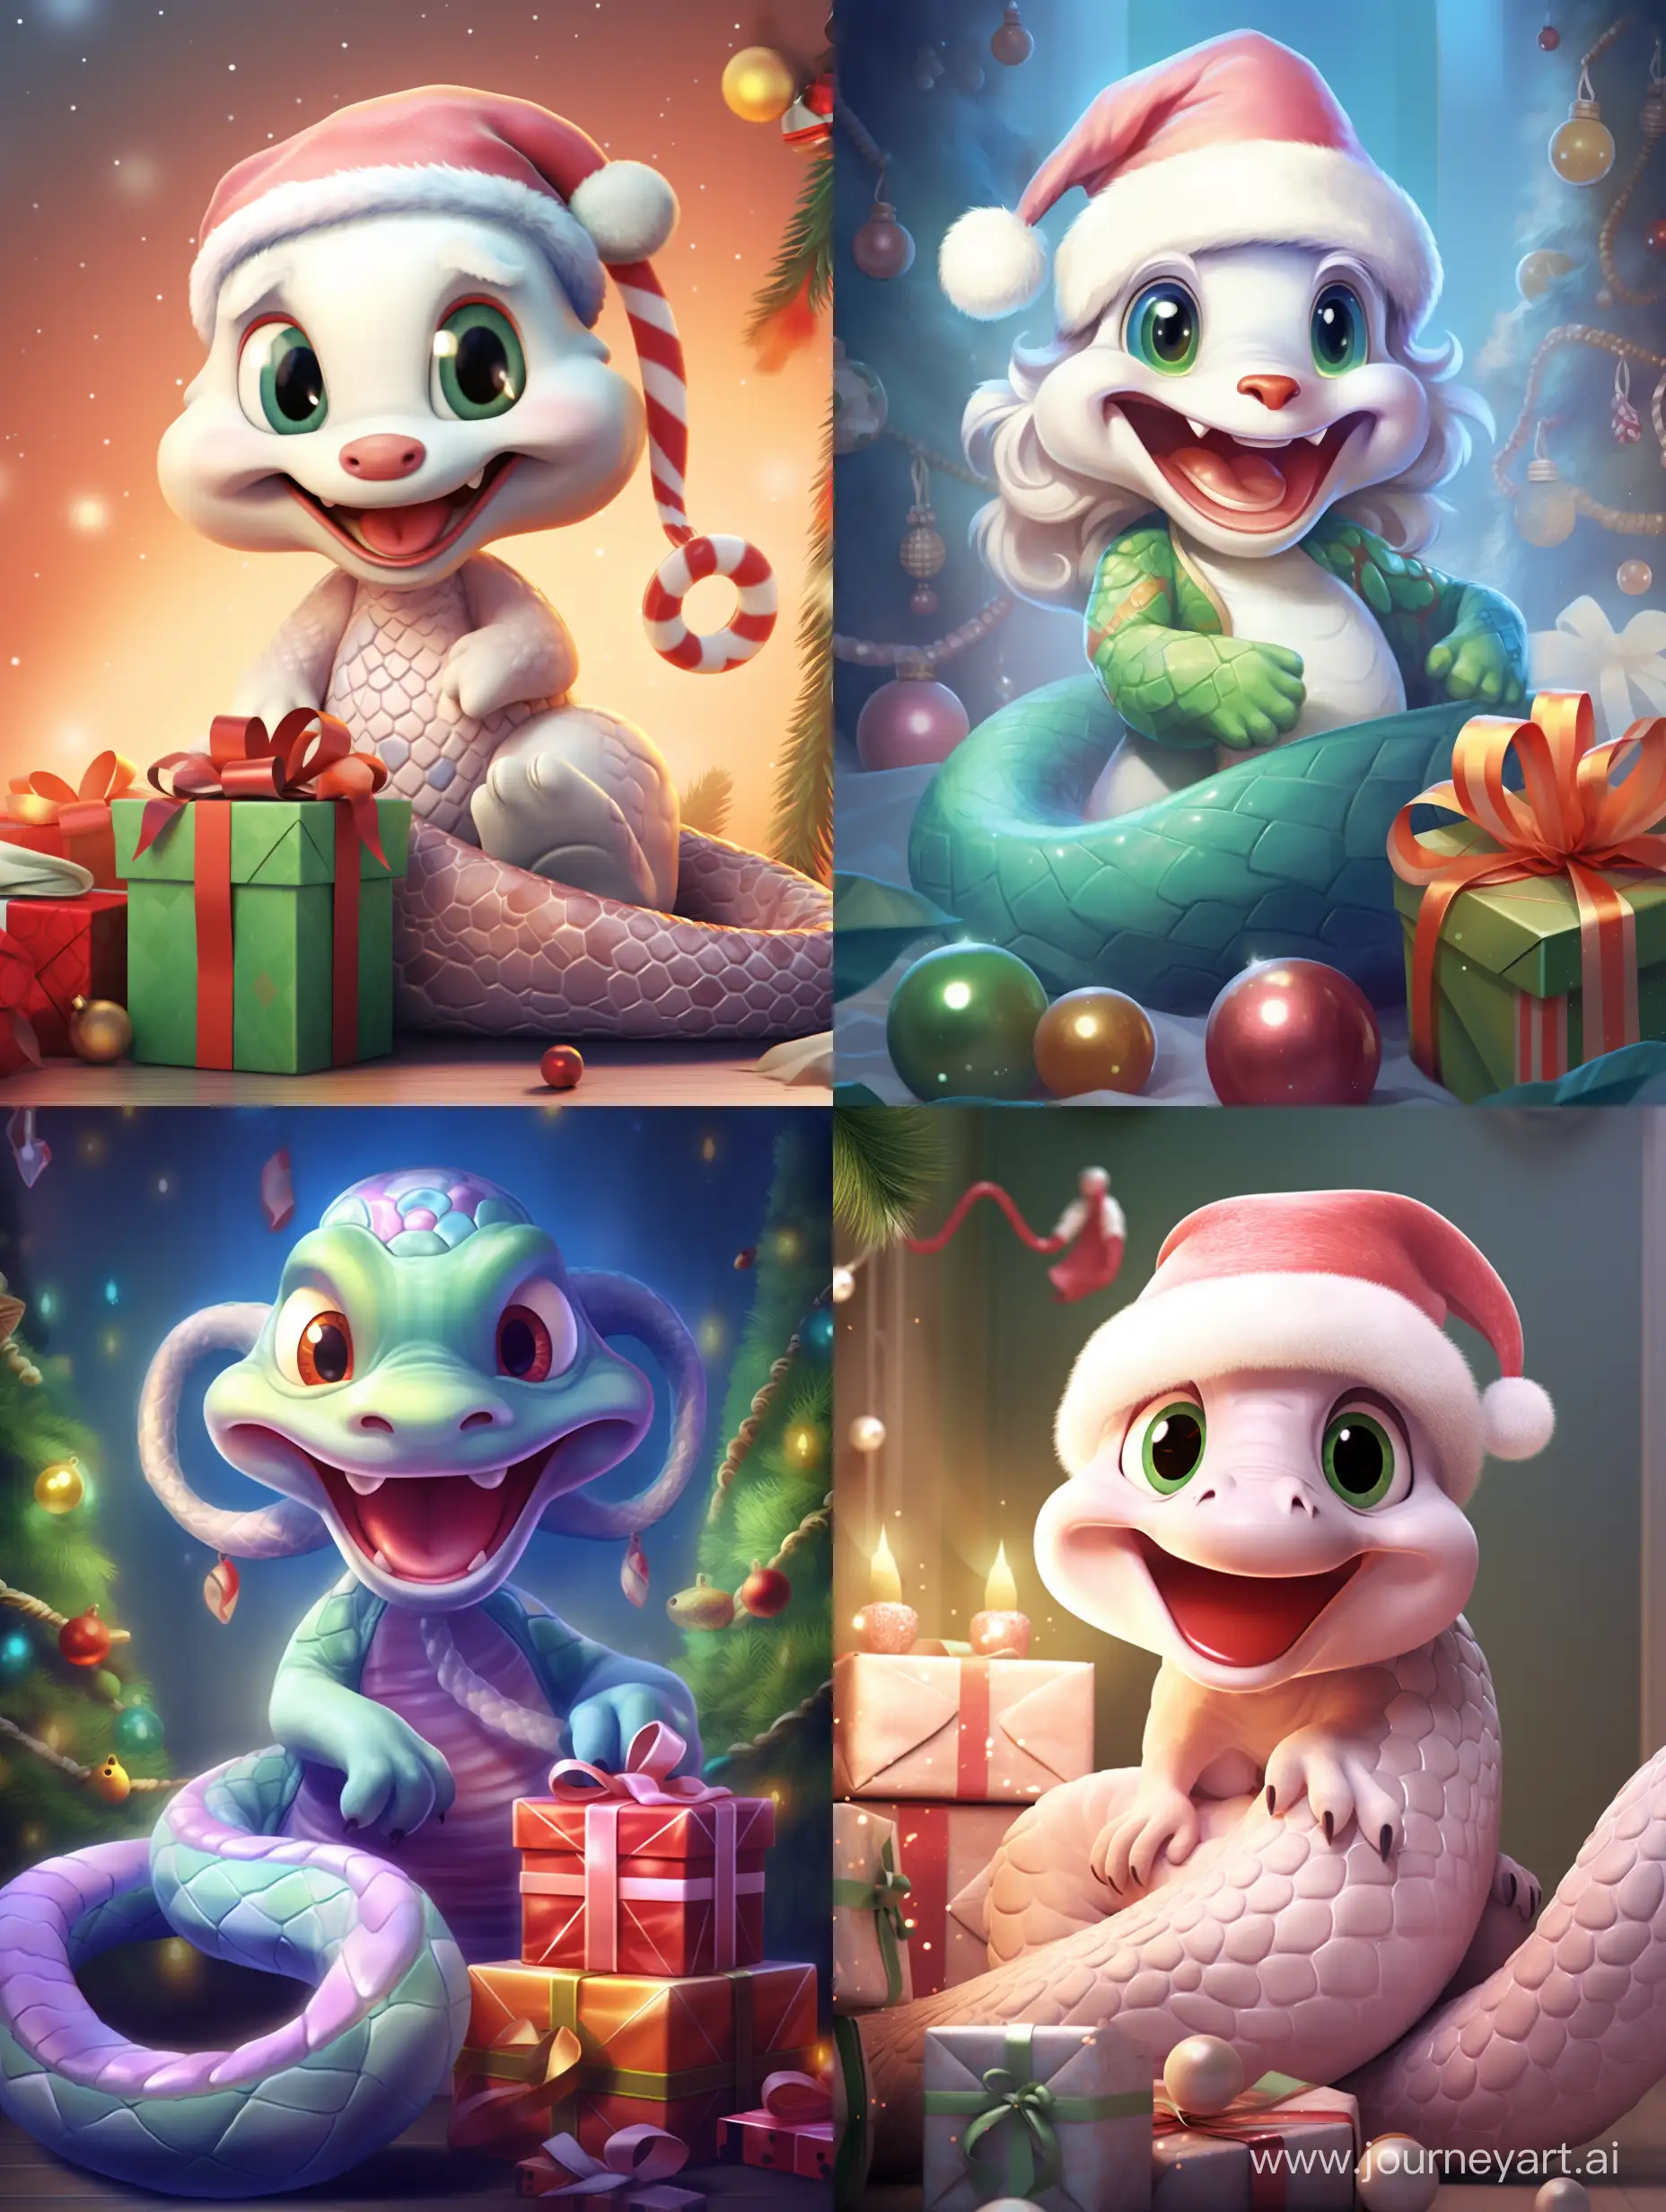 Cute and kind and funny snake in Disney jr Pixar  style. In a Santa Claus hat. With gifts and a Christmas tree. The picture is in pastel and light colors